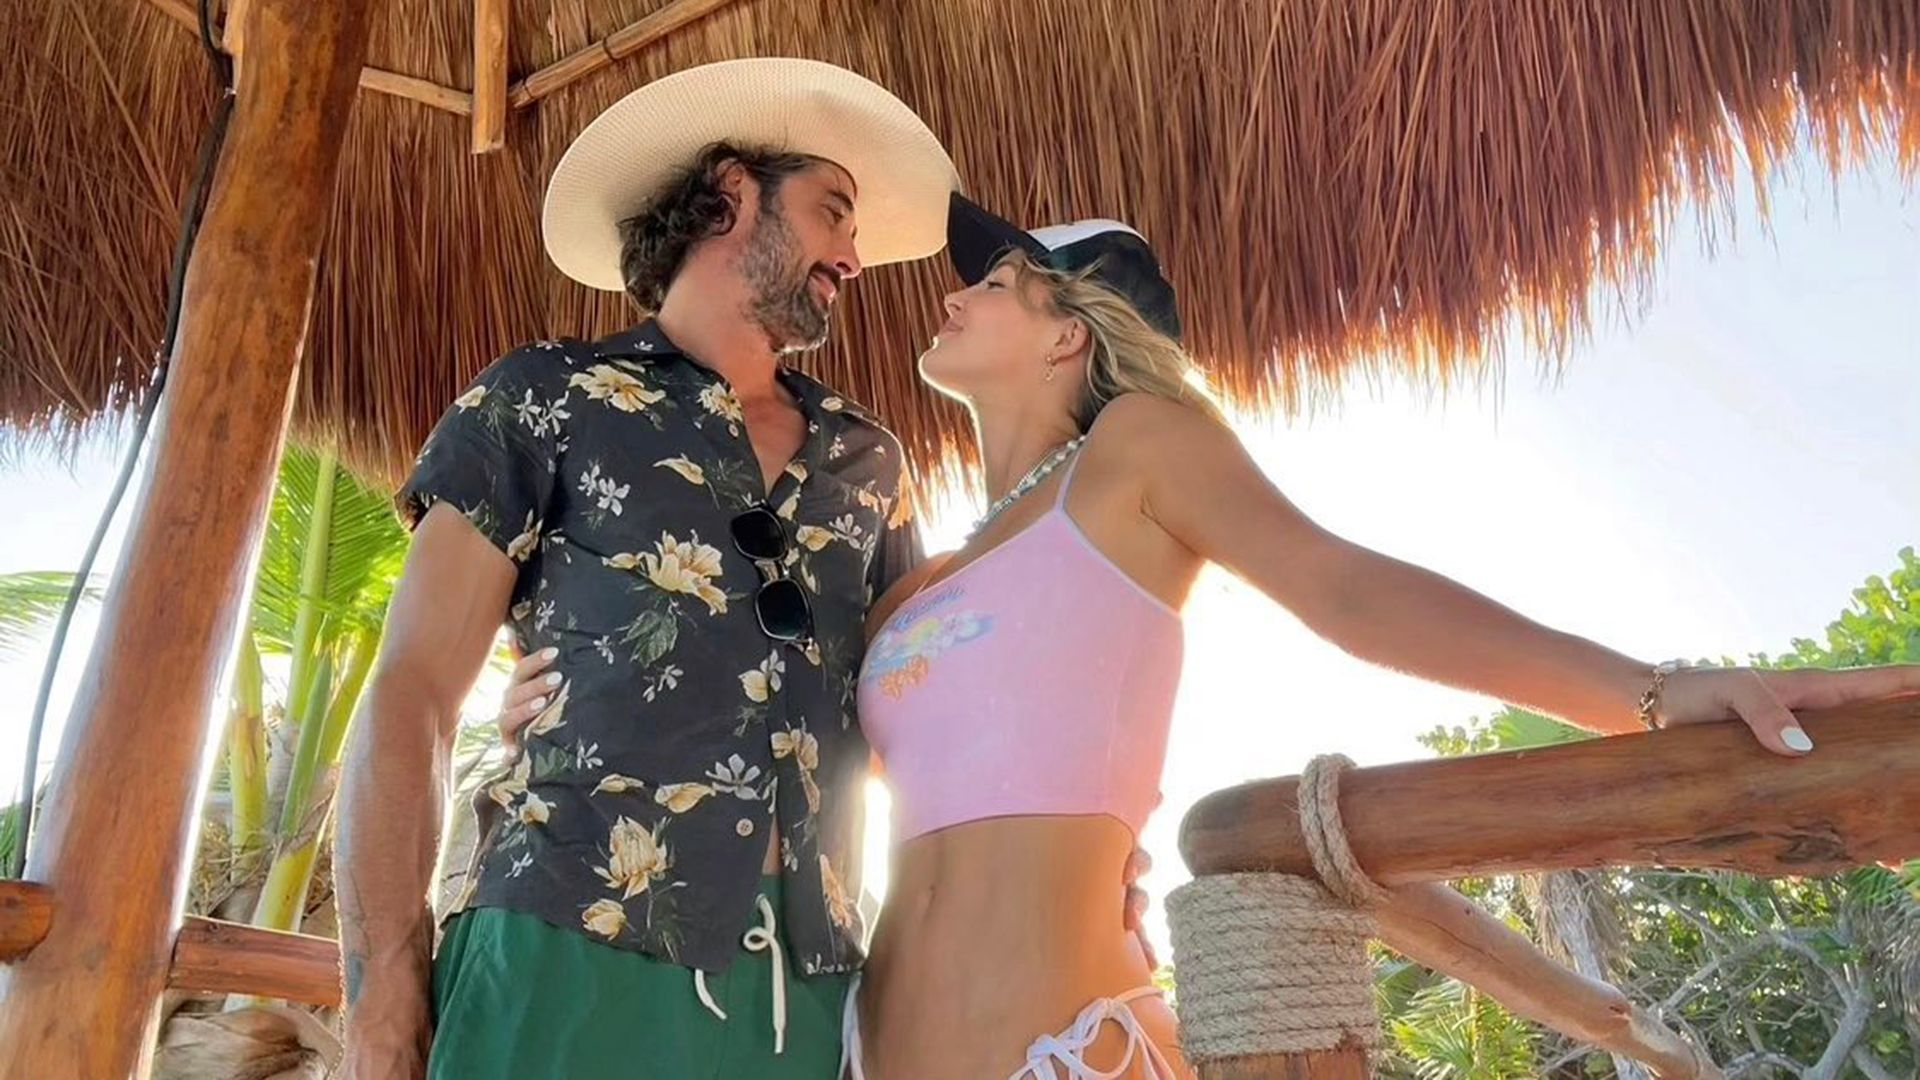 Ryan Bingham and Hassie Harrison cuddled up at the beach